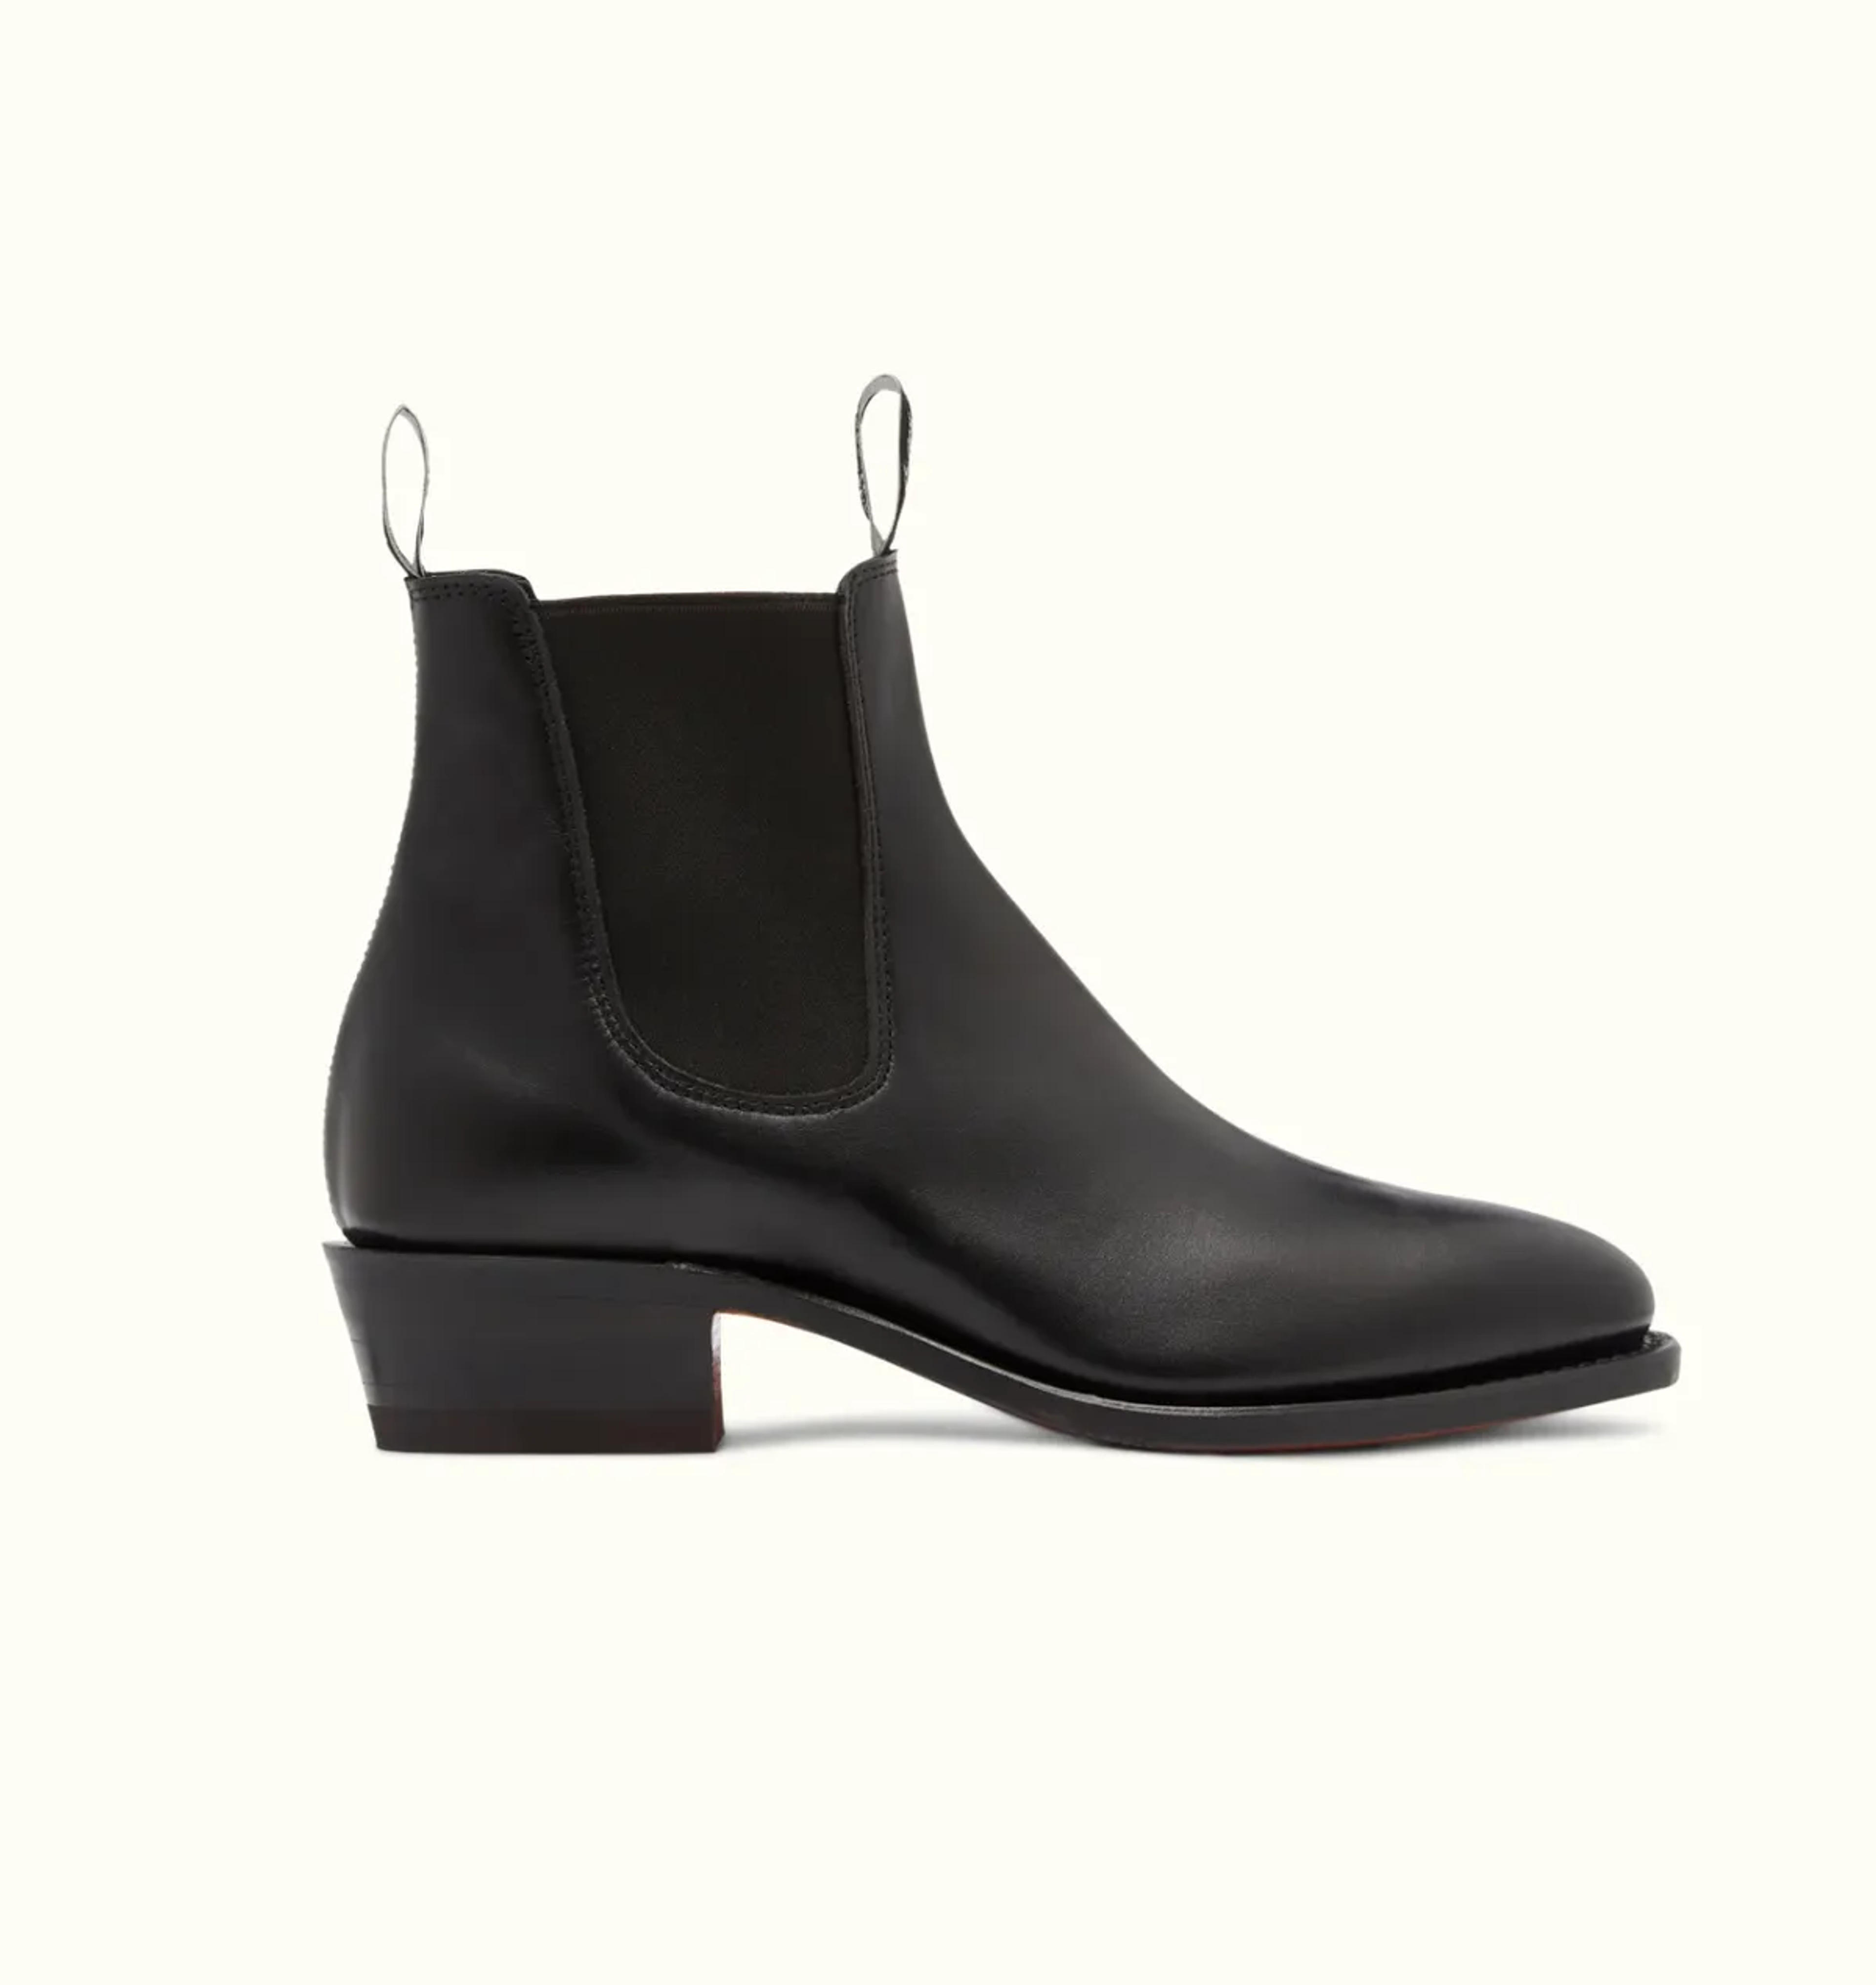 Black Yearling Boots | R.M.Williams Chelsea Boots | R.M.Williams® United States